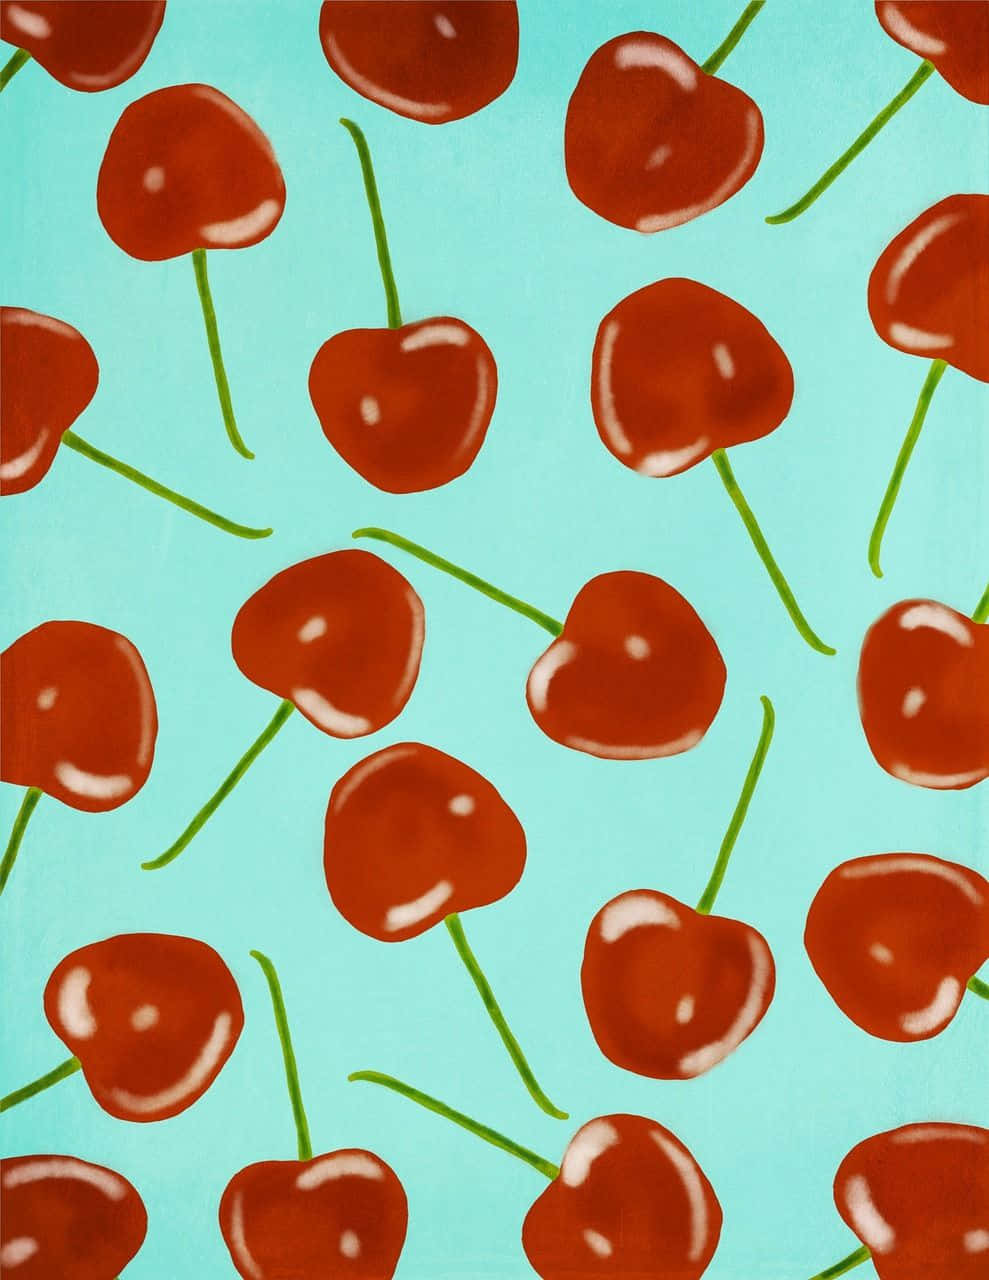 Send your taste buds into overdrive with these beautiful cherry aesthetics. Wallpaper